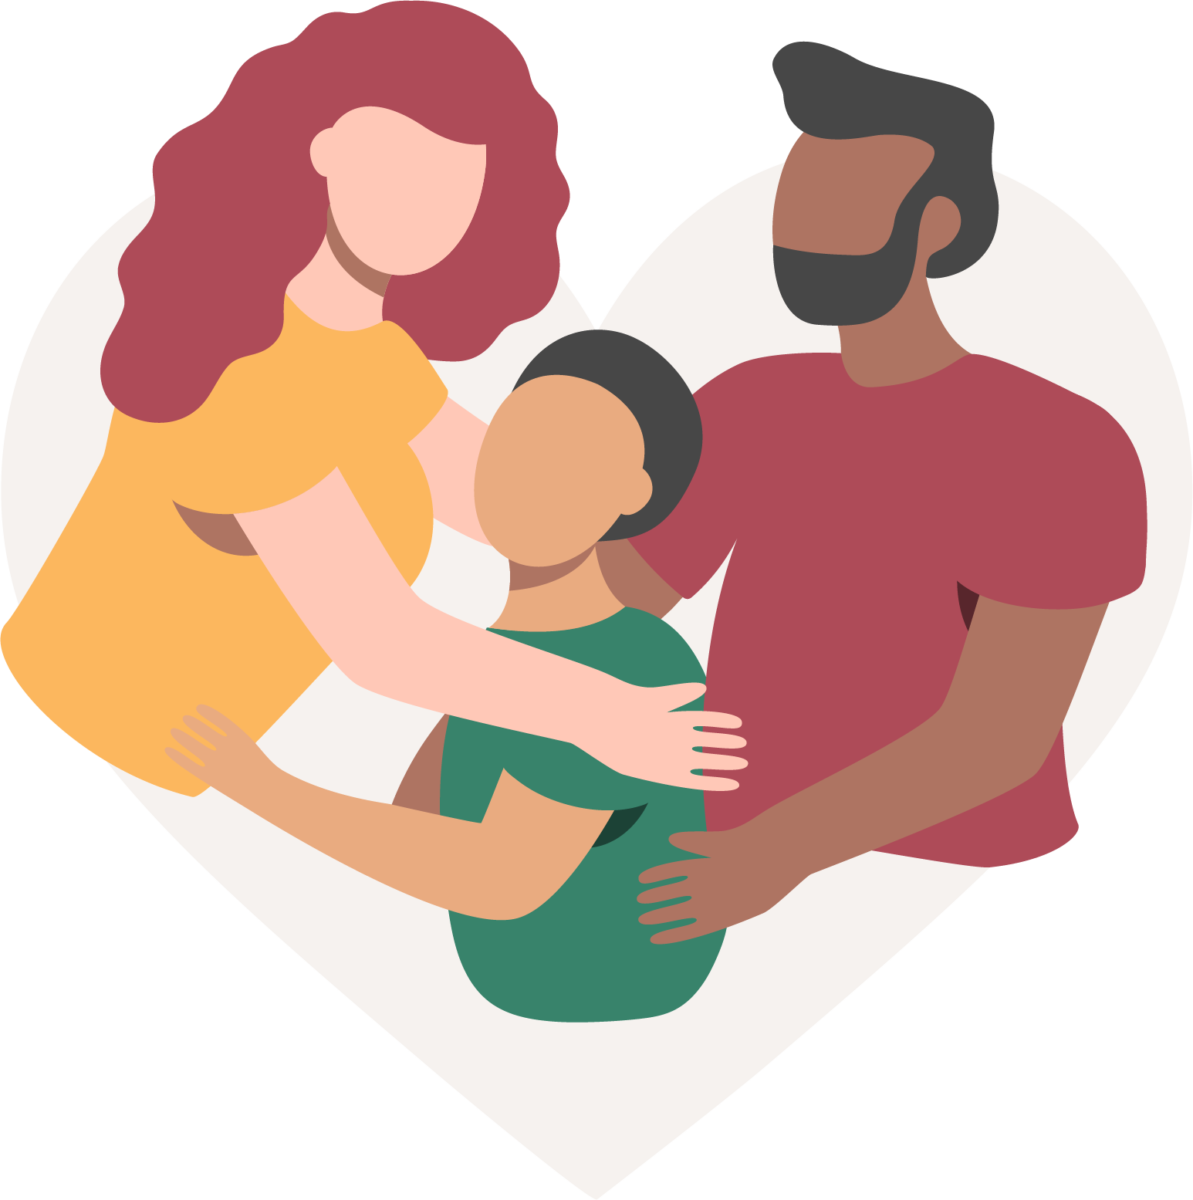 woman with red hair and yellow shirt and man with black hair and beard embrace child with green shirt and black hair representing a family unity